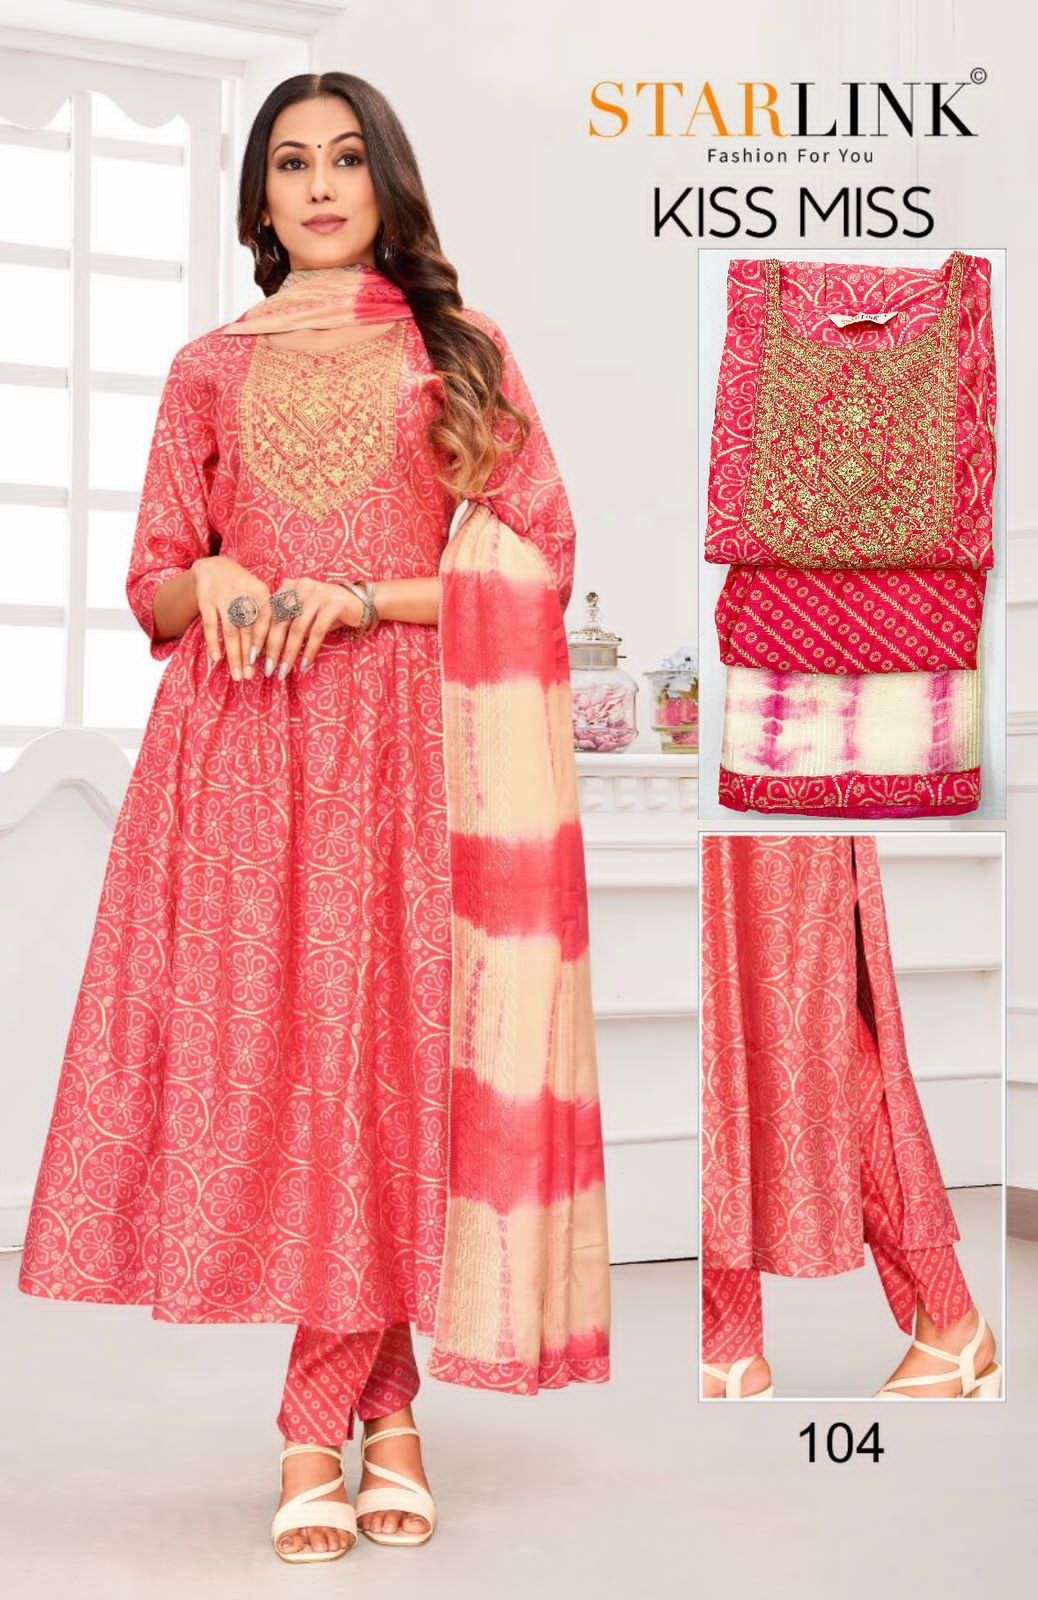 KISS MISS BY STARLINK 101 TO 116 SERIES FESTIVE SUITS BEAUTIFUL FANCY COLORFUL STYLISH PARTY WEAR & OCCASIONAL WEAR CHANDERI EMBROIDERED DRESSES AT WHOLESALE PRICE